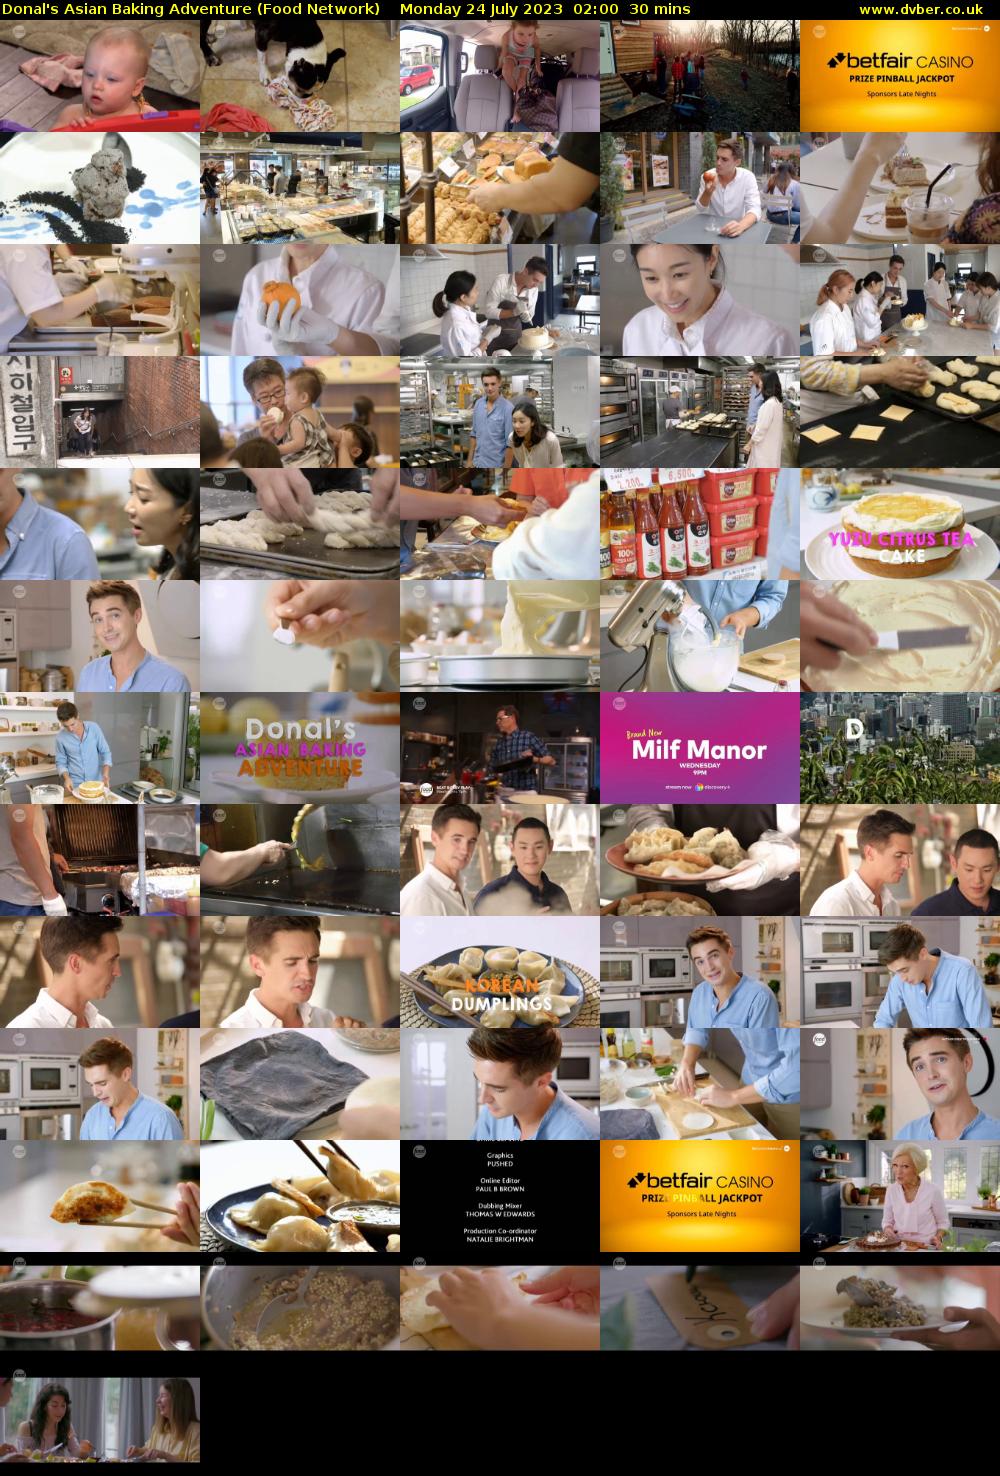 Donal's Asian Baking Adventure (Food Network) Monday 24 July 2023 02:00 - 02:30